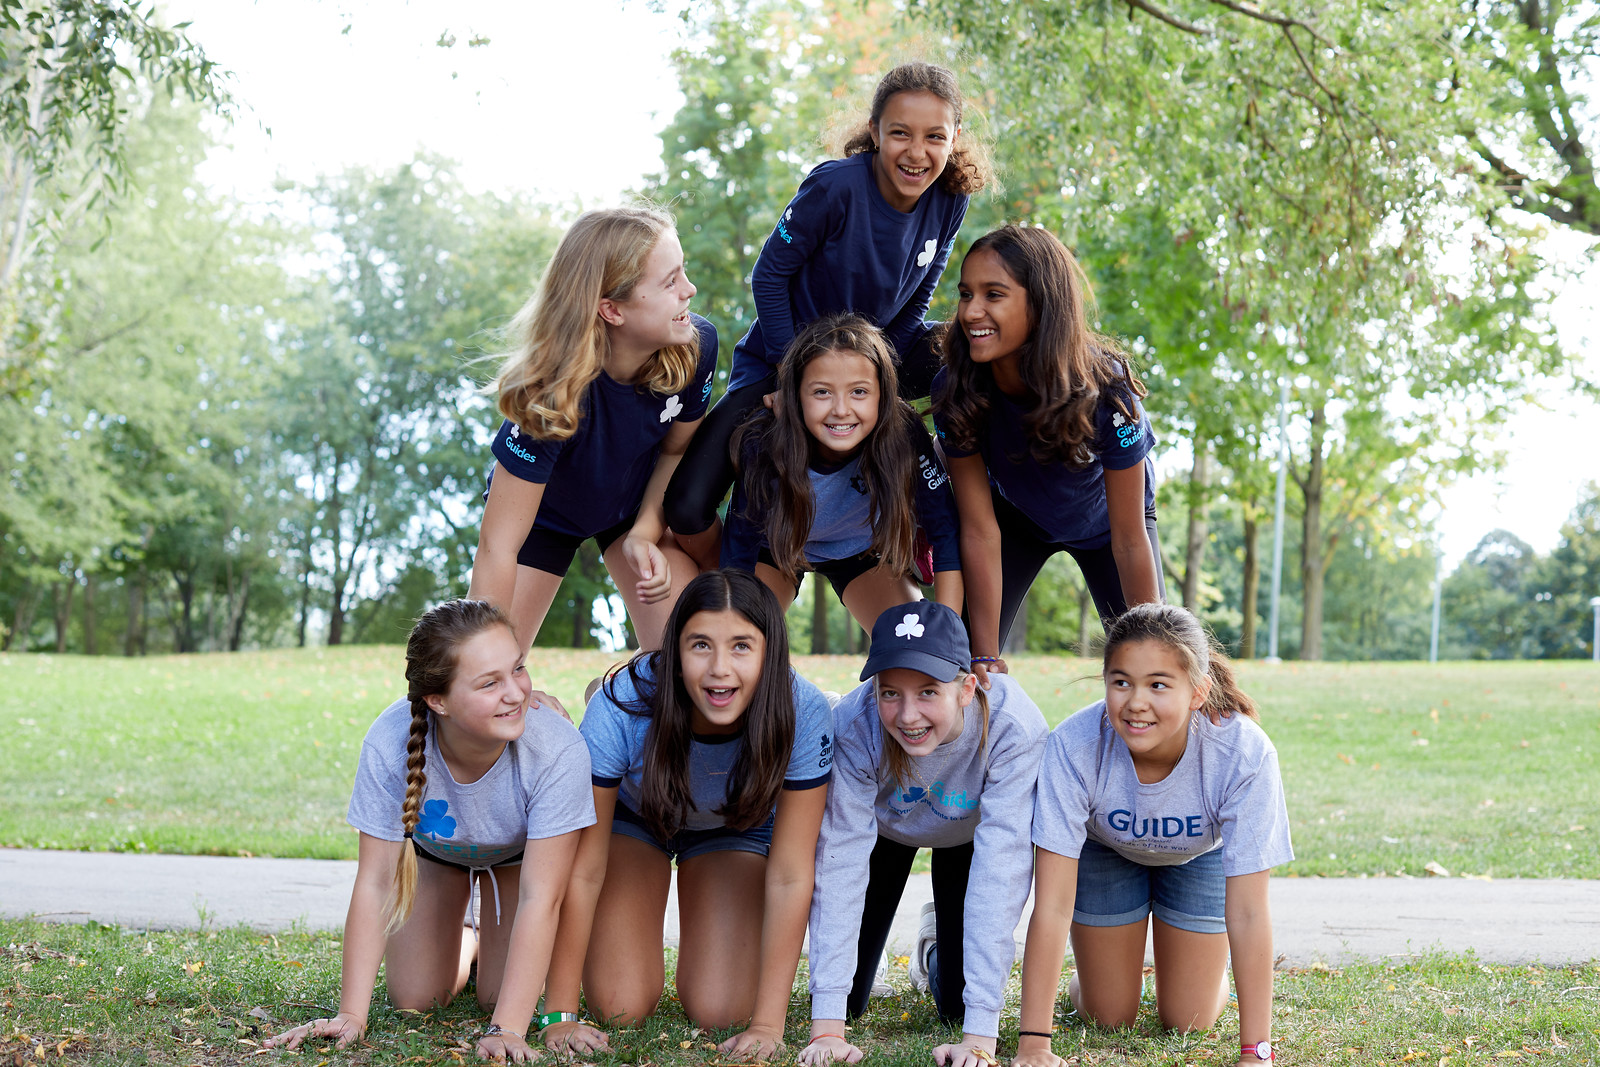 A group of Girl Guides aged 9 to 11 making a human pyramid outside in a park